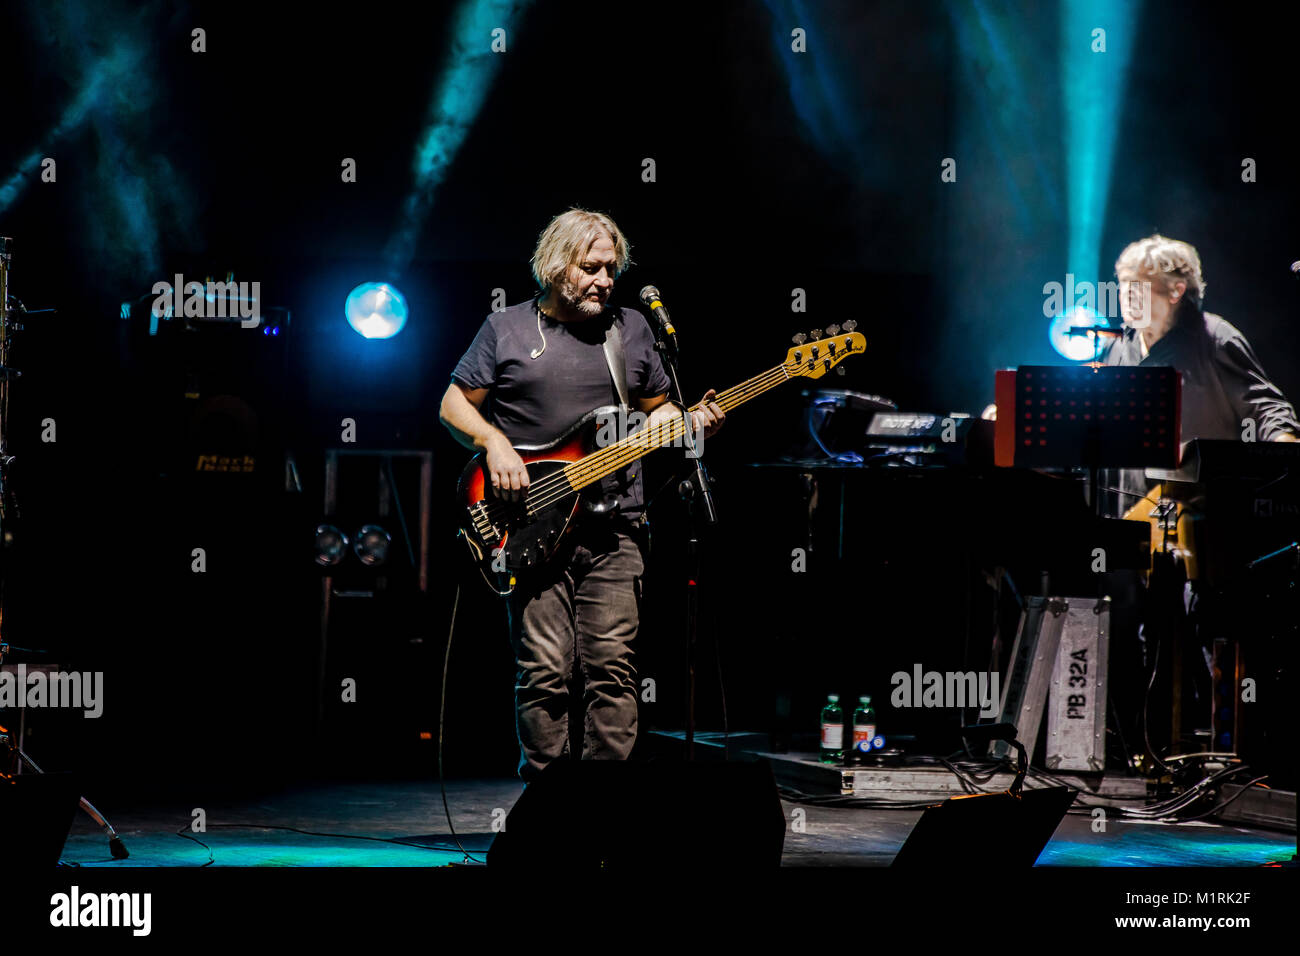 Teatro Duse, Bologna - Italy. The italian rock band, Nomadi, performed during a live of their last tour. Credit Luigi Rizzo/Alamy Live News Stock Photo